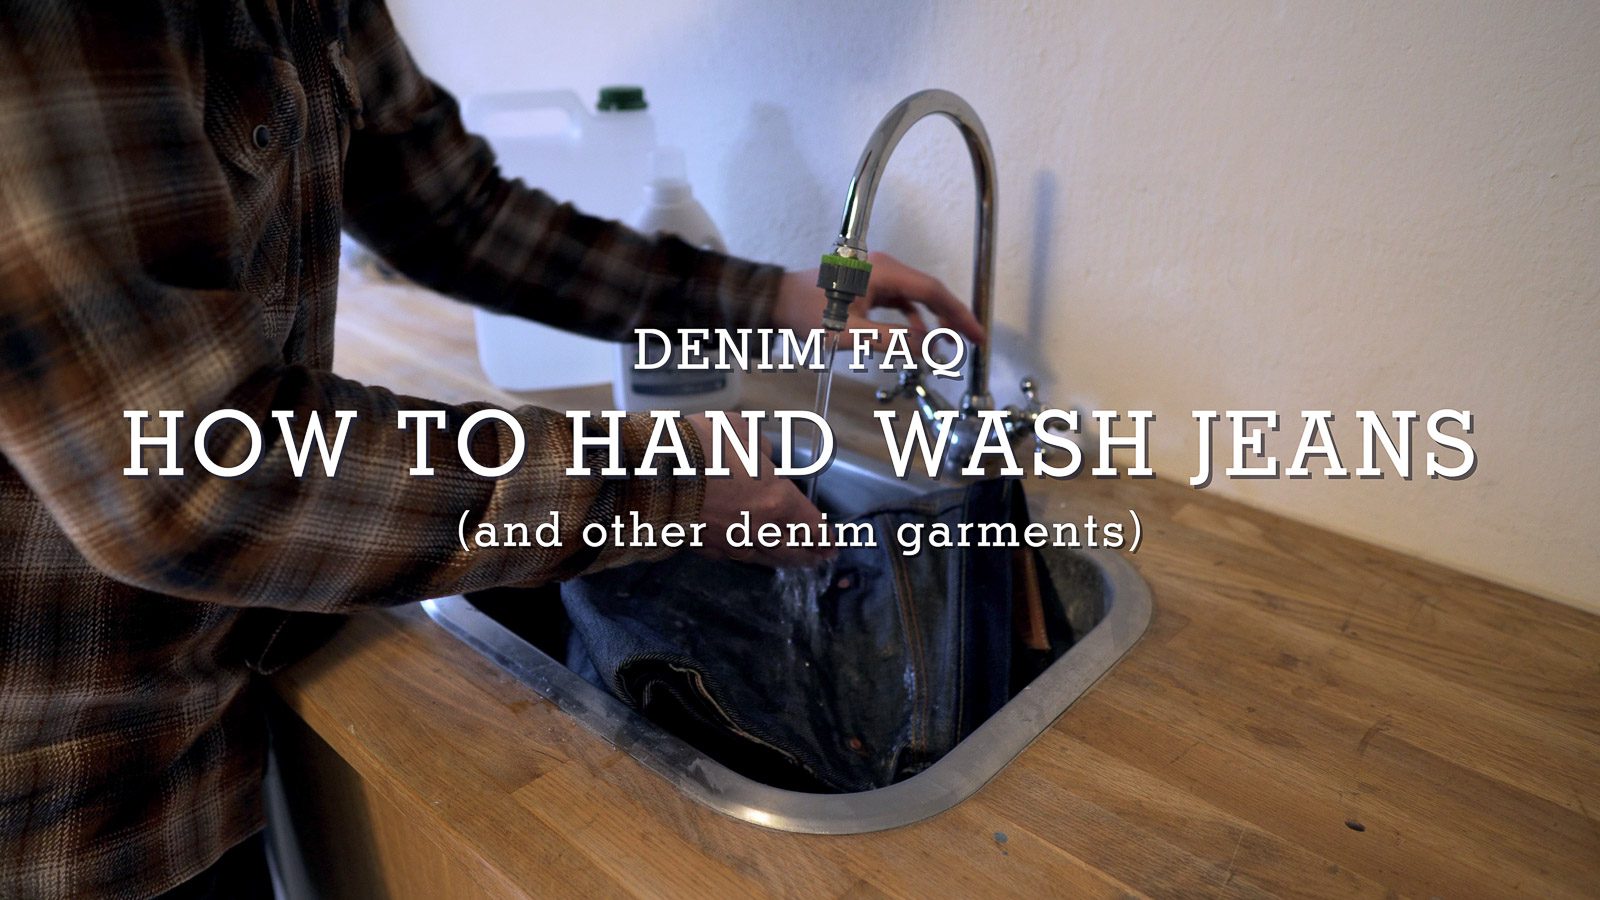 How to hand wash jeans in 5 simple 